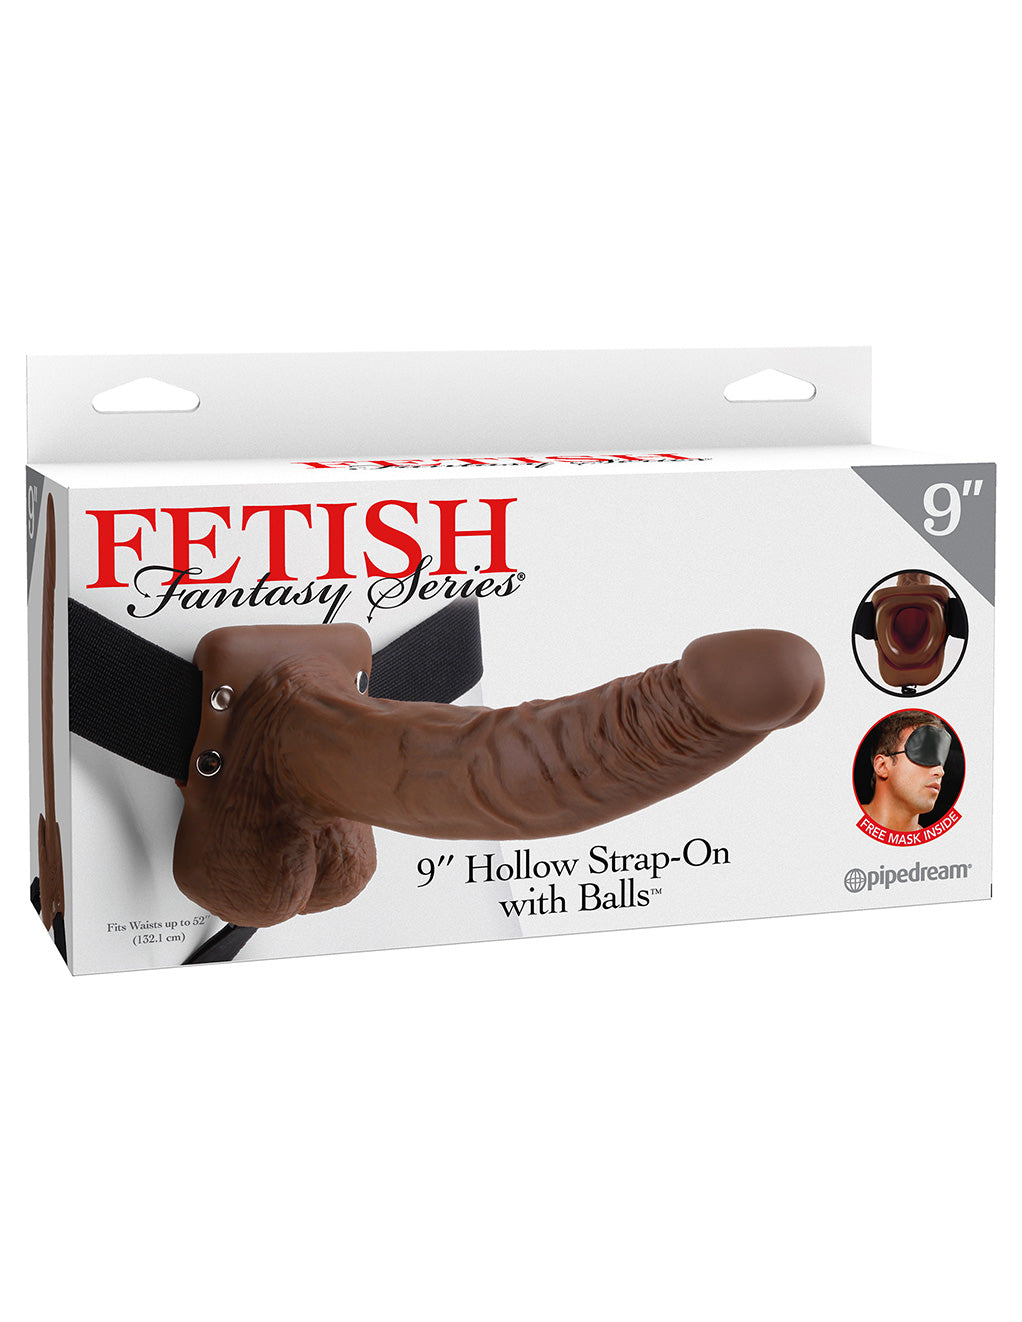 Fetish Fantasy Series 9 Inch Hollow Strap-On- Brown- Box